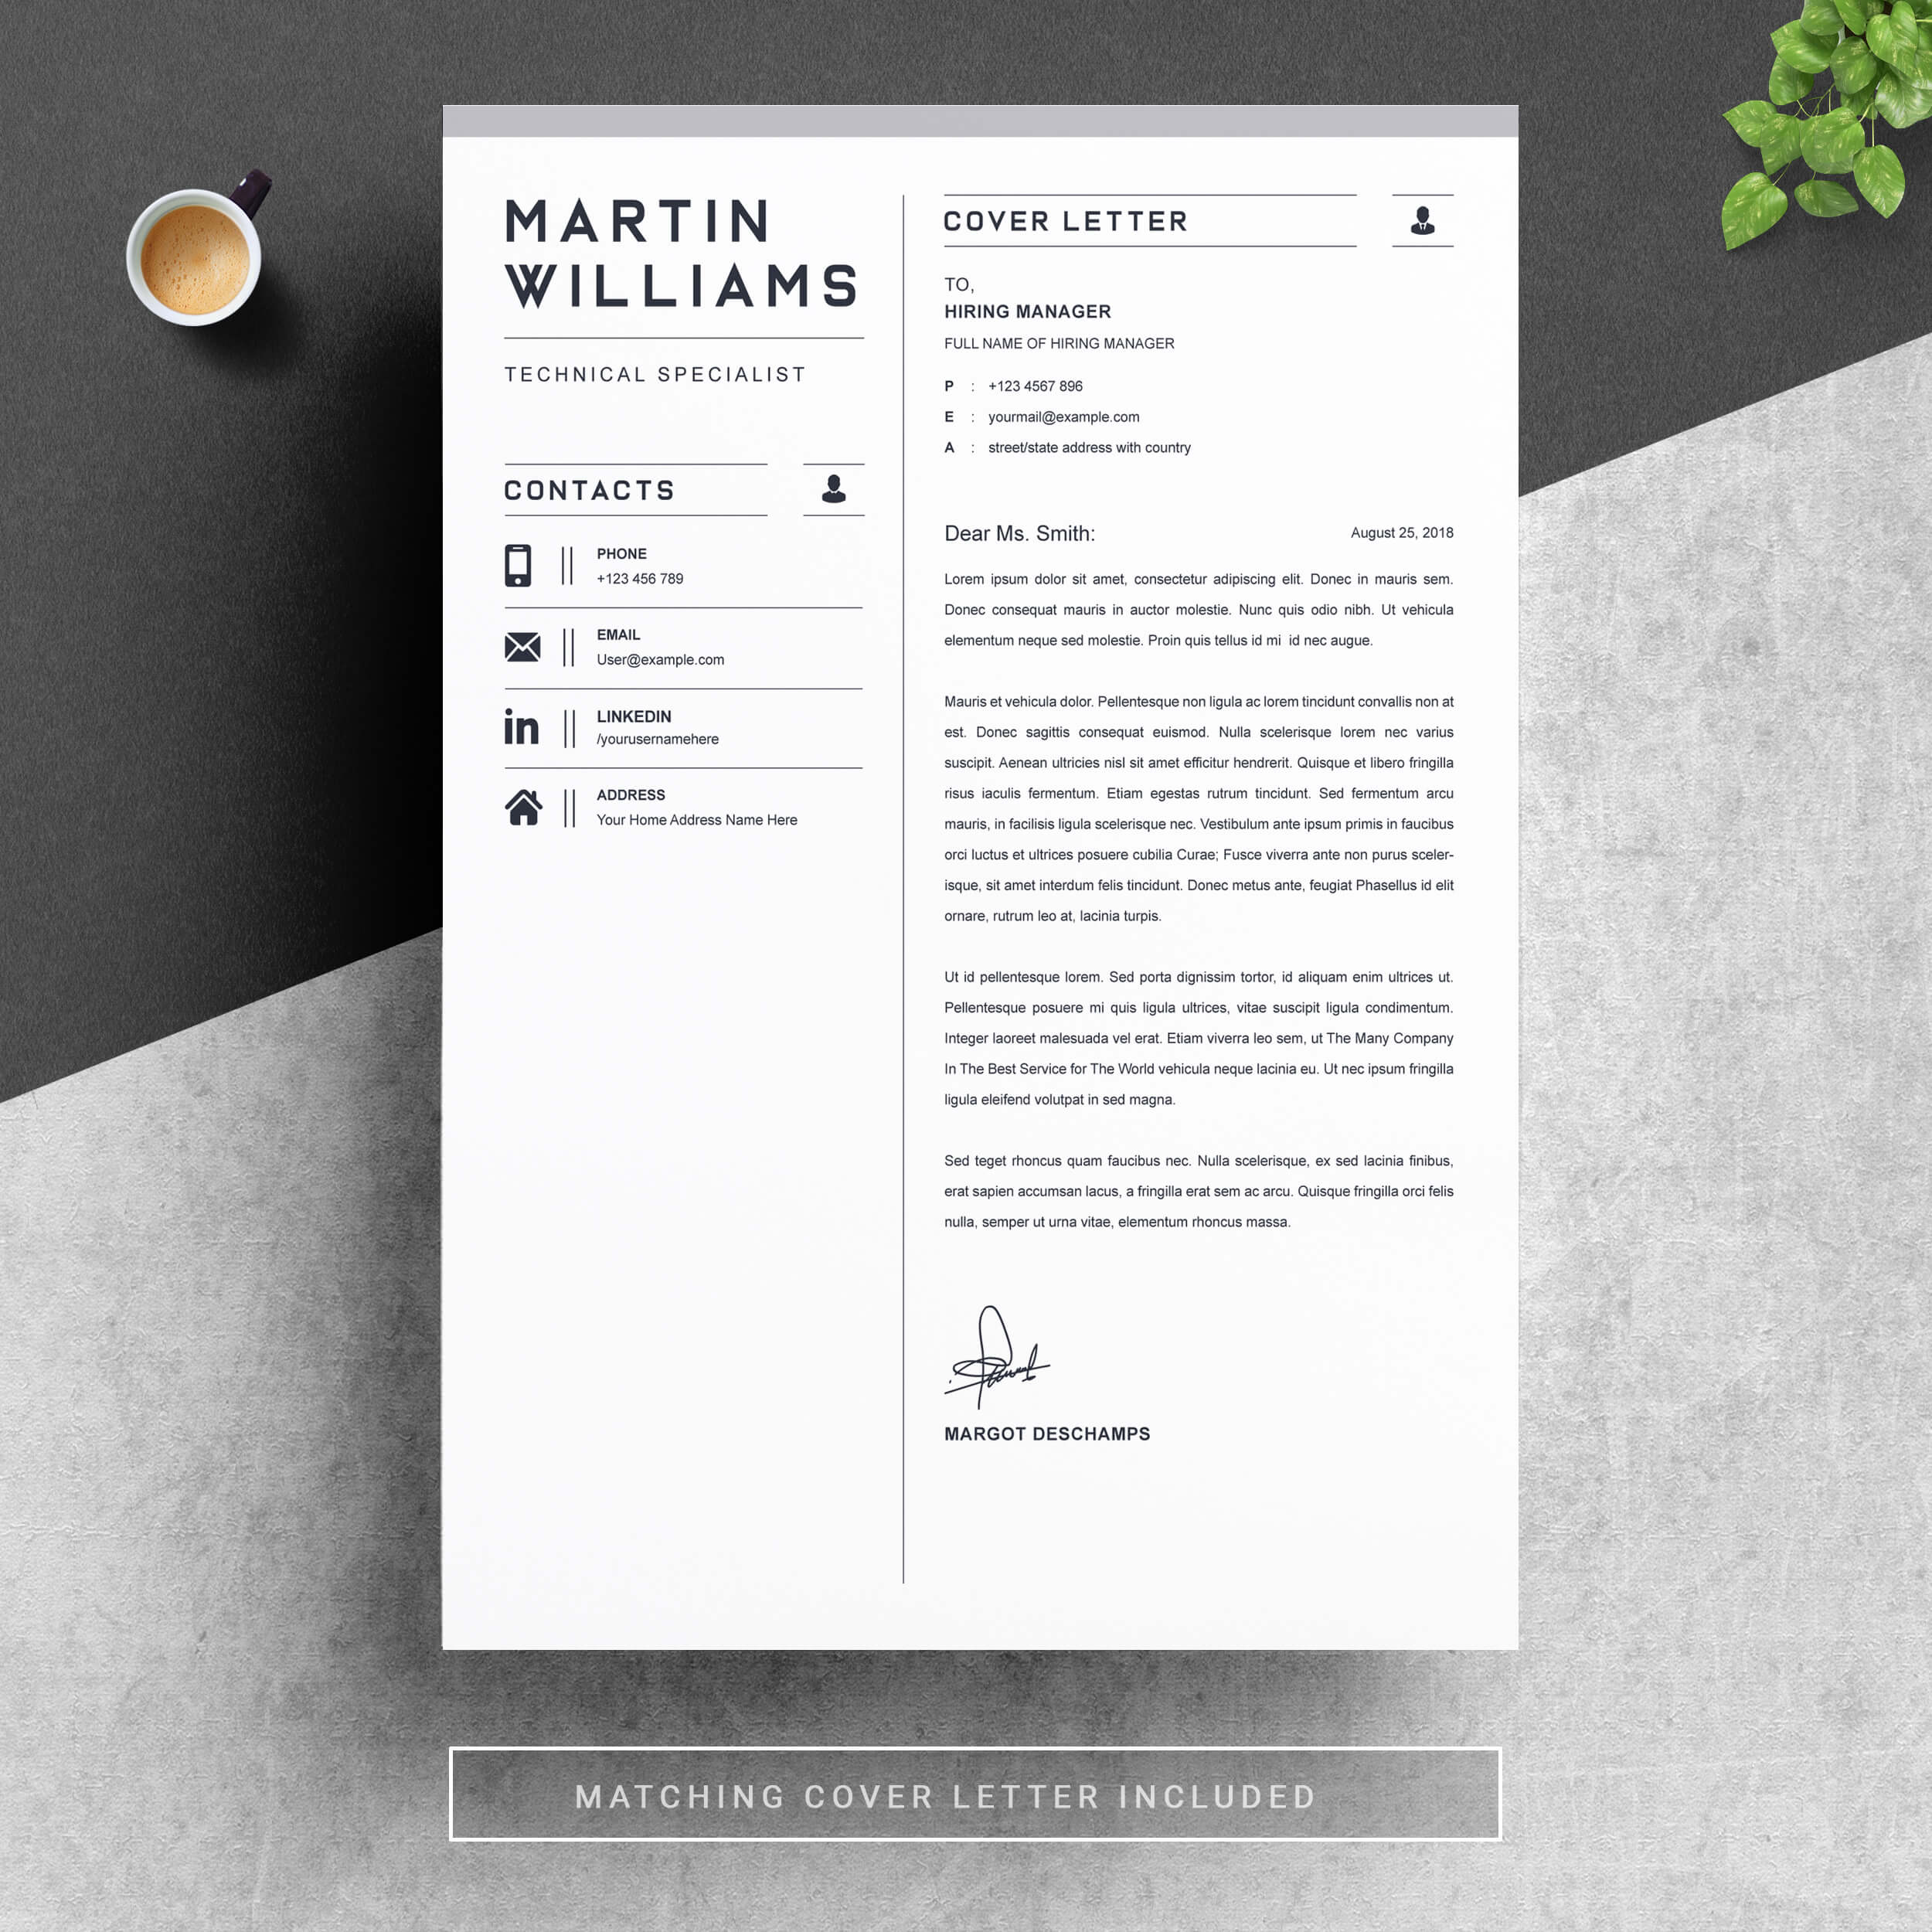 04 resume cover letter page free resume design template 8 848